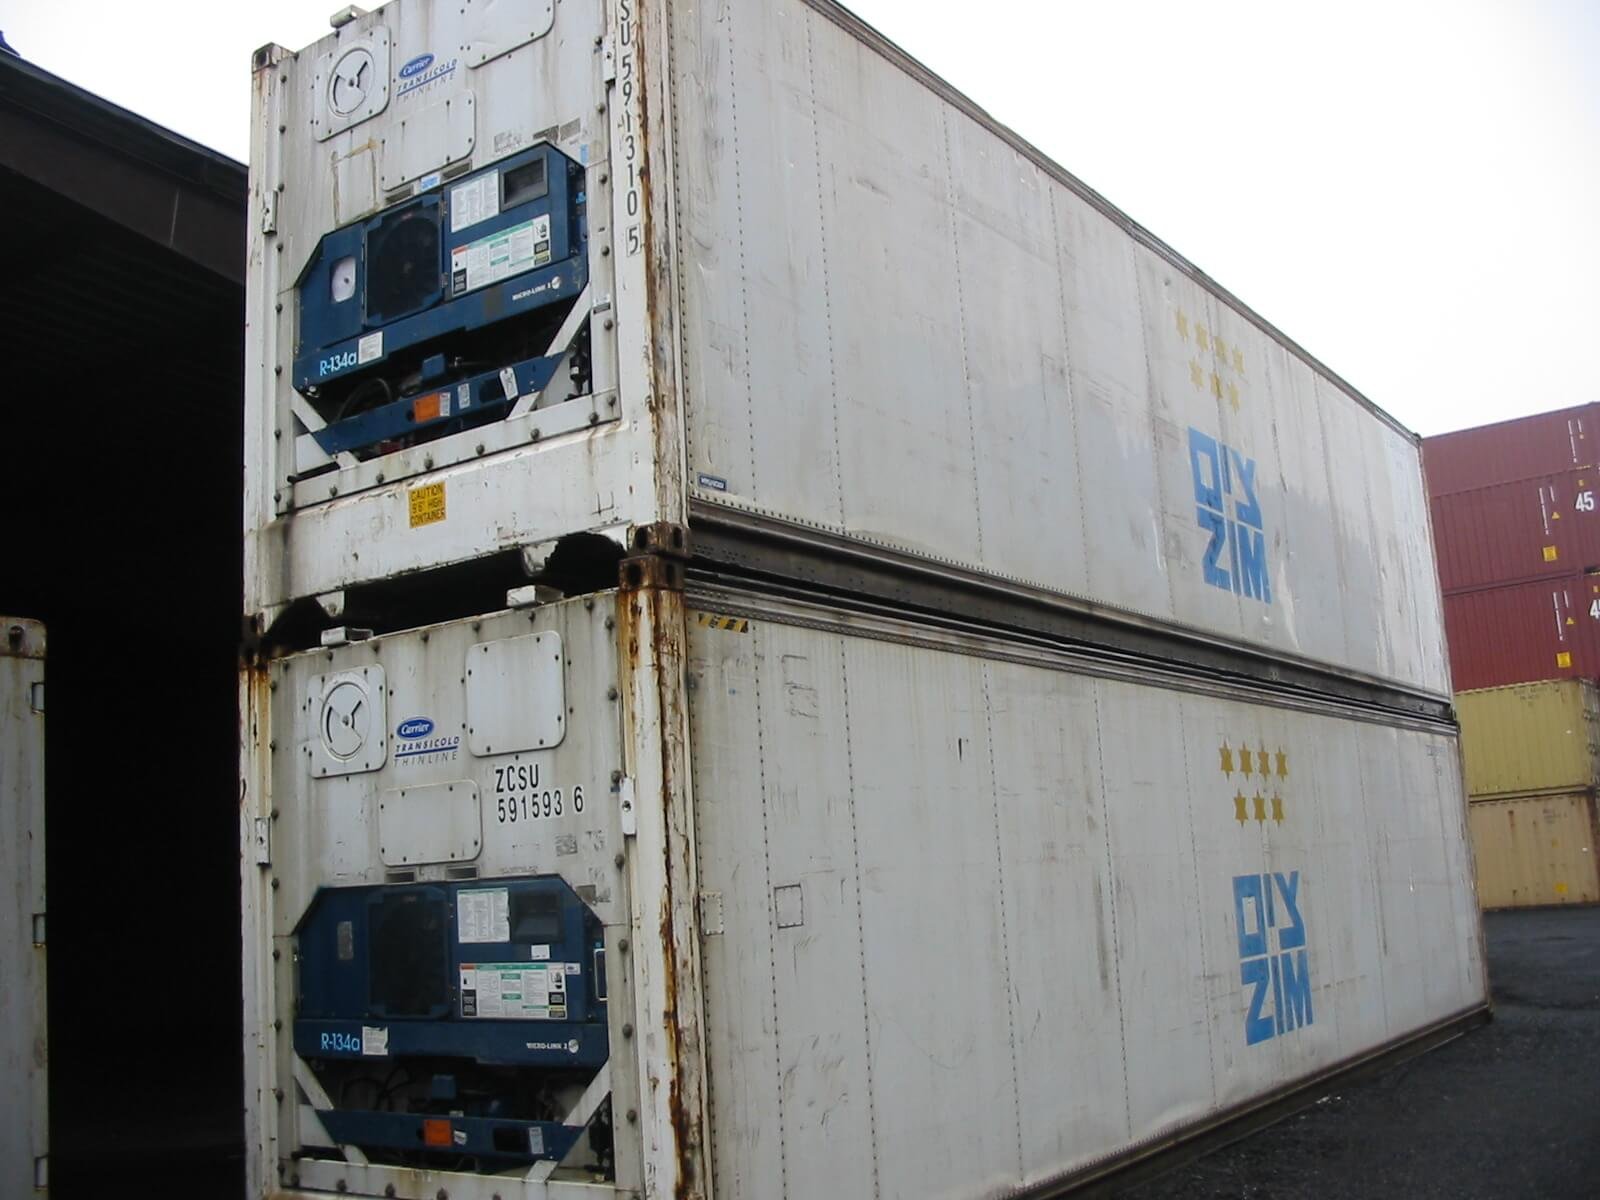 https://cdn.cmgcontainers.net/uploads/product-gallery-images/40ft-hc-insulated-used-shipping-container.jpeg